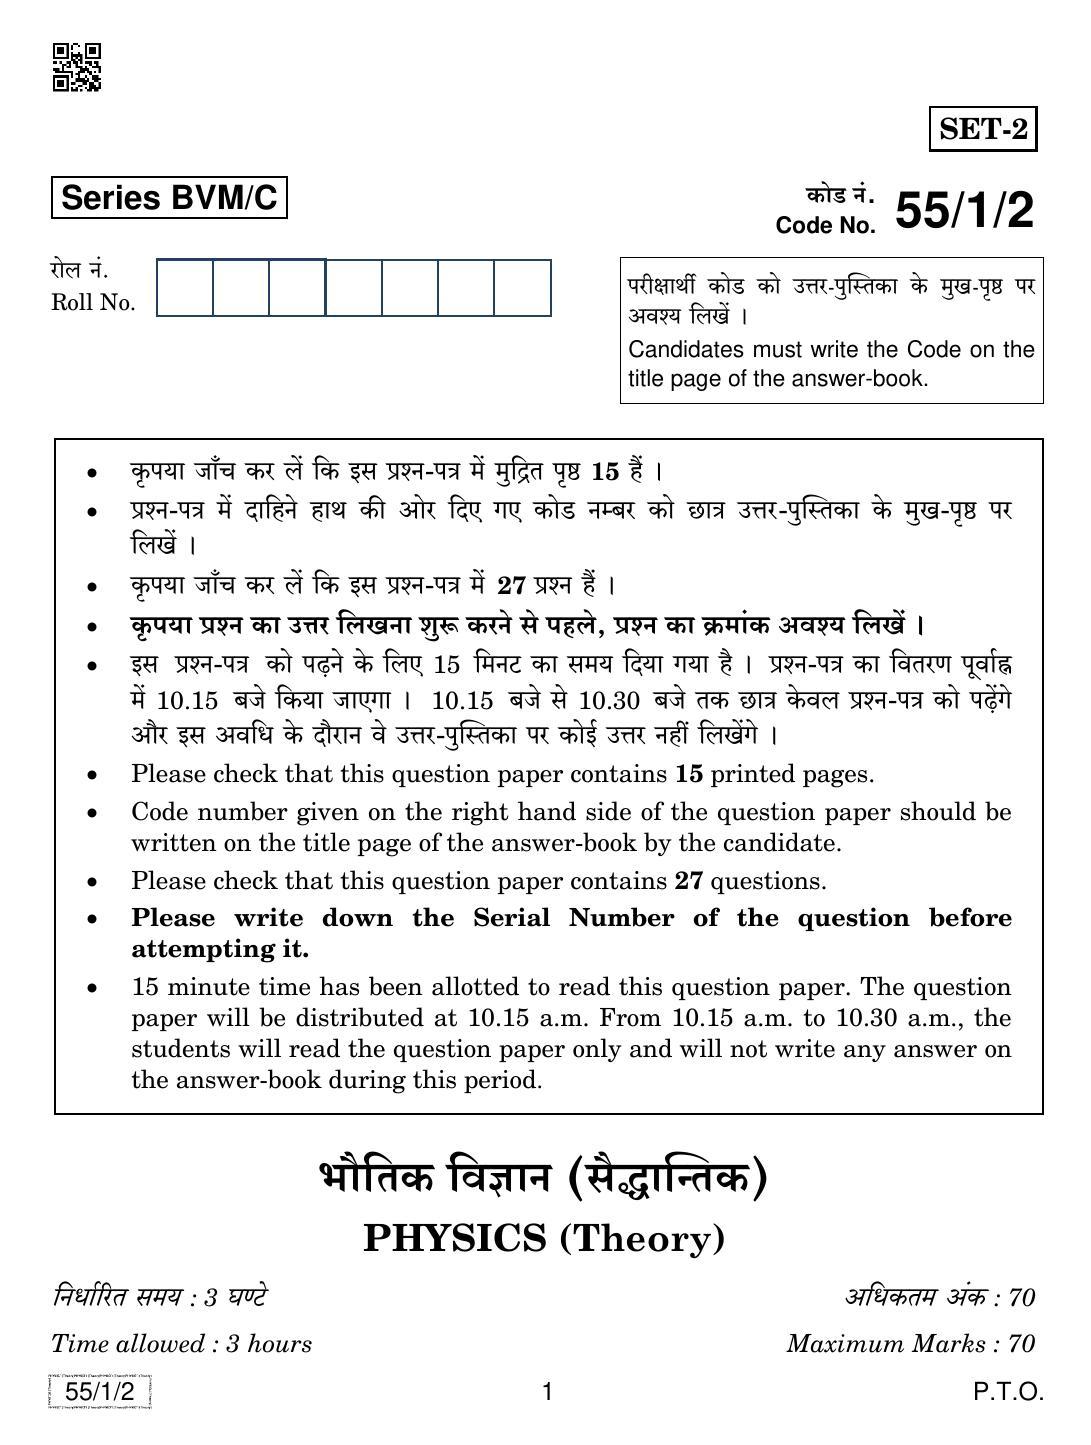 CBSE Class 12 55-1-2 PHYSICS 2019 Compartment Question Paper - Page 1